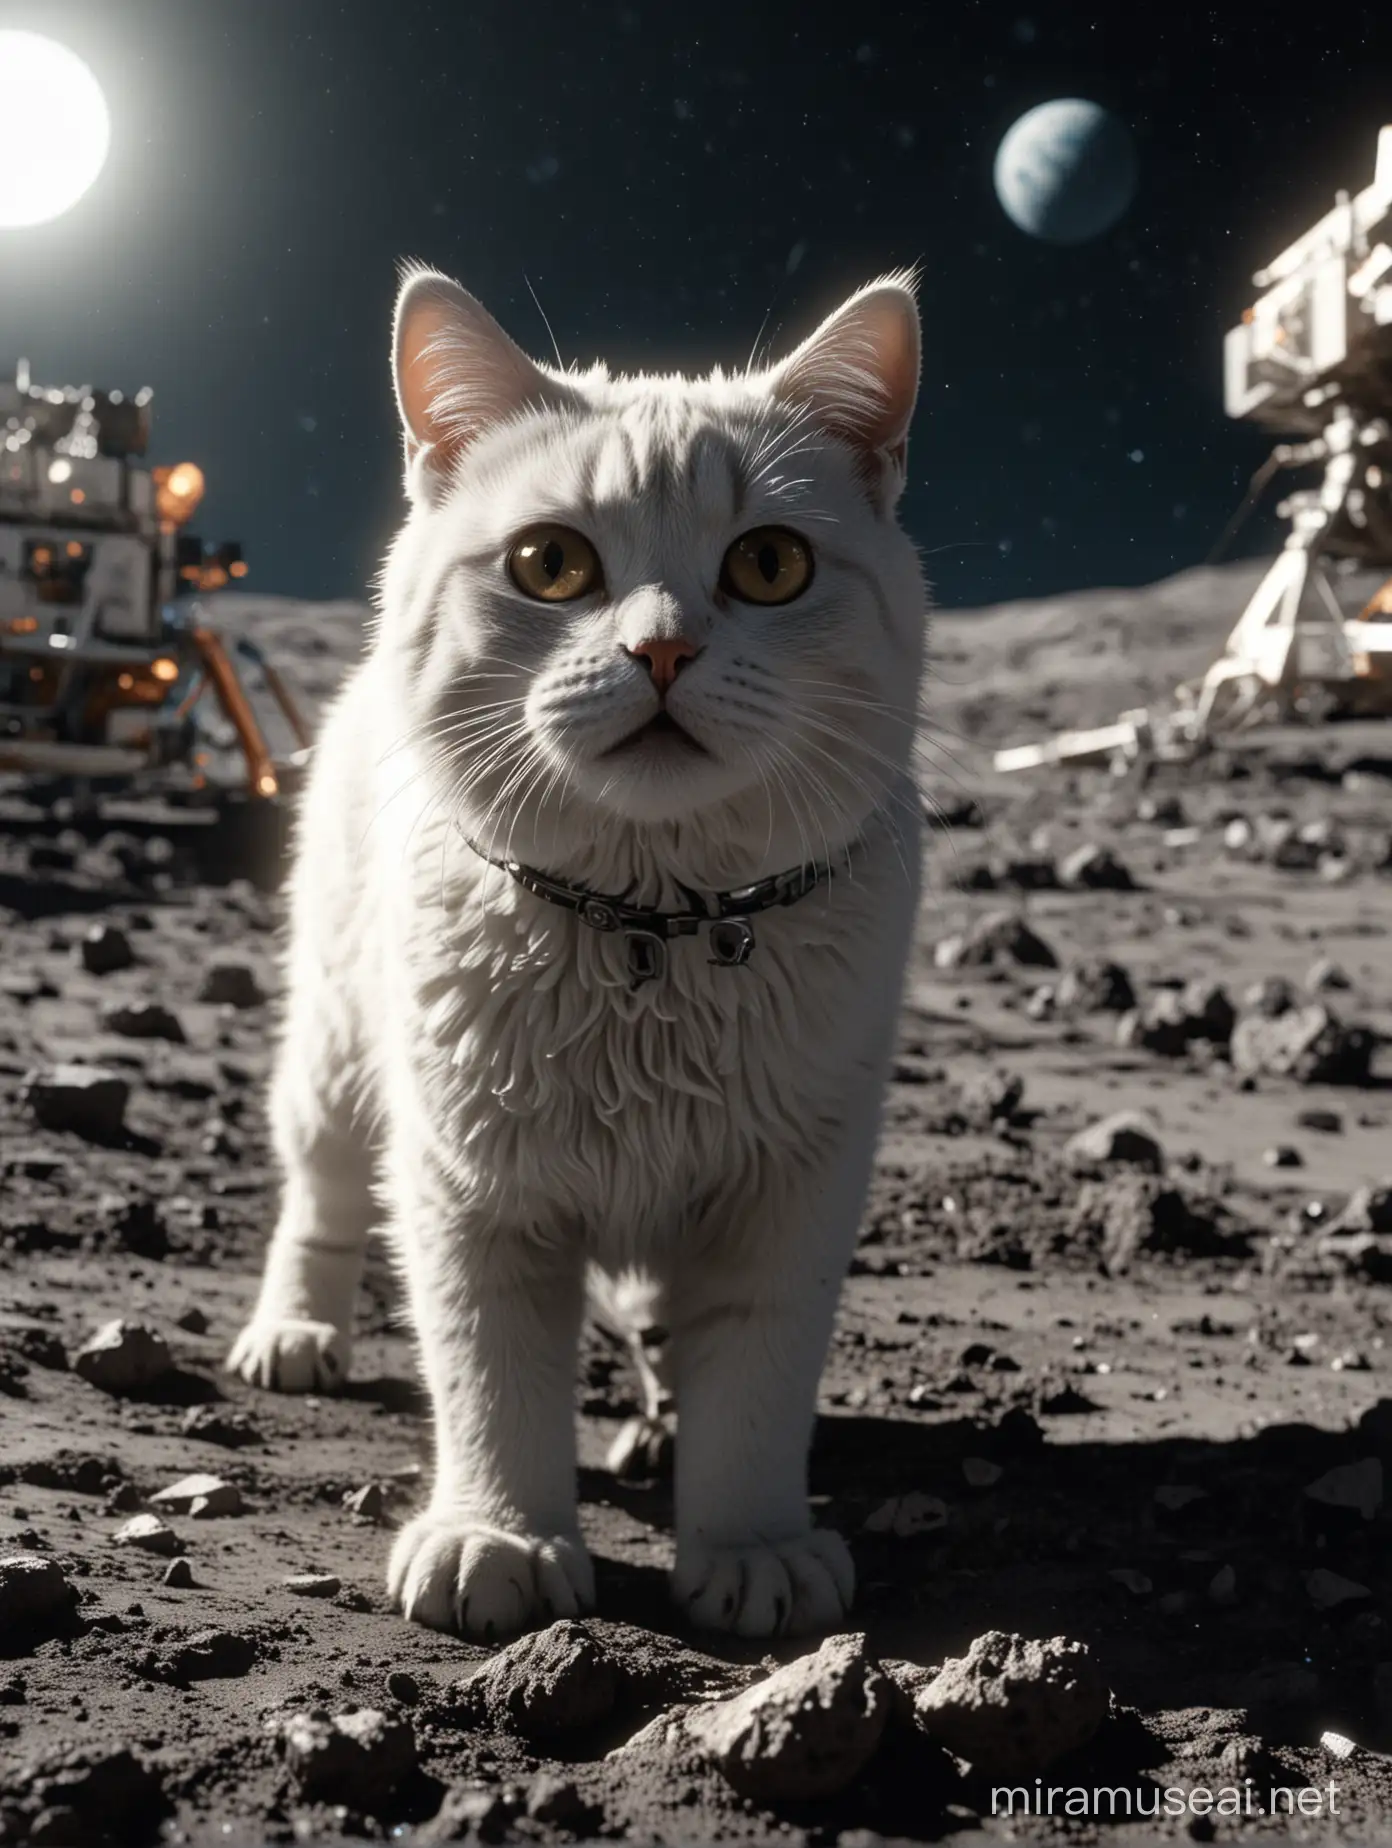 Surprised Cat with ApolloStyle Moon Mission Background